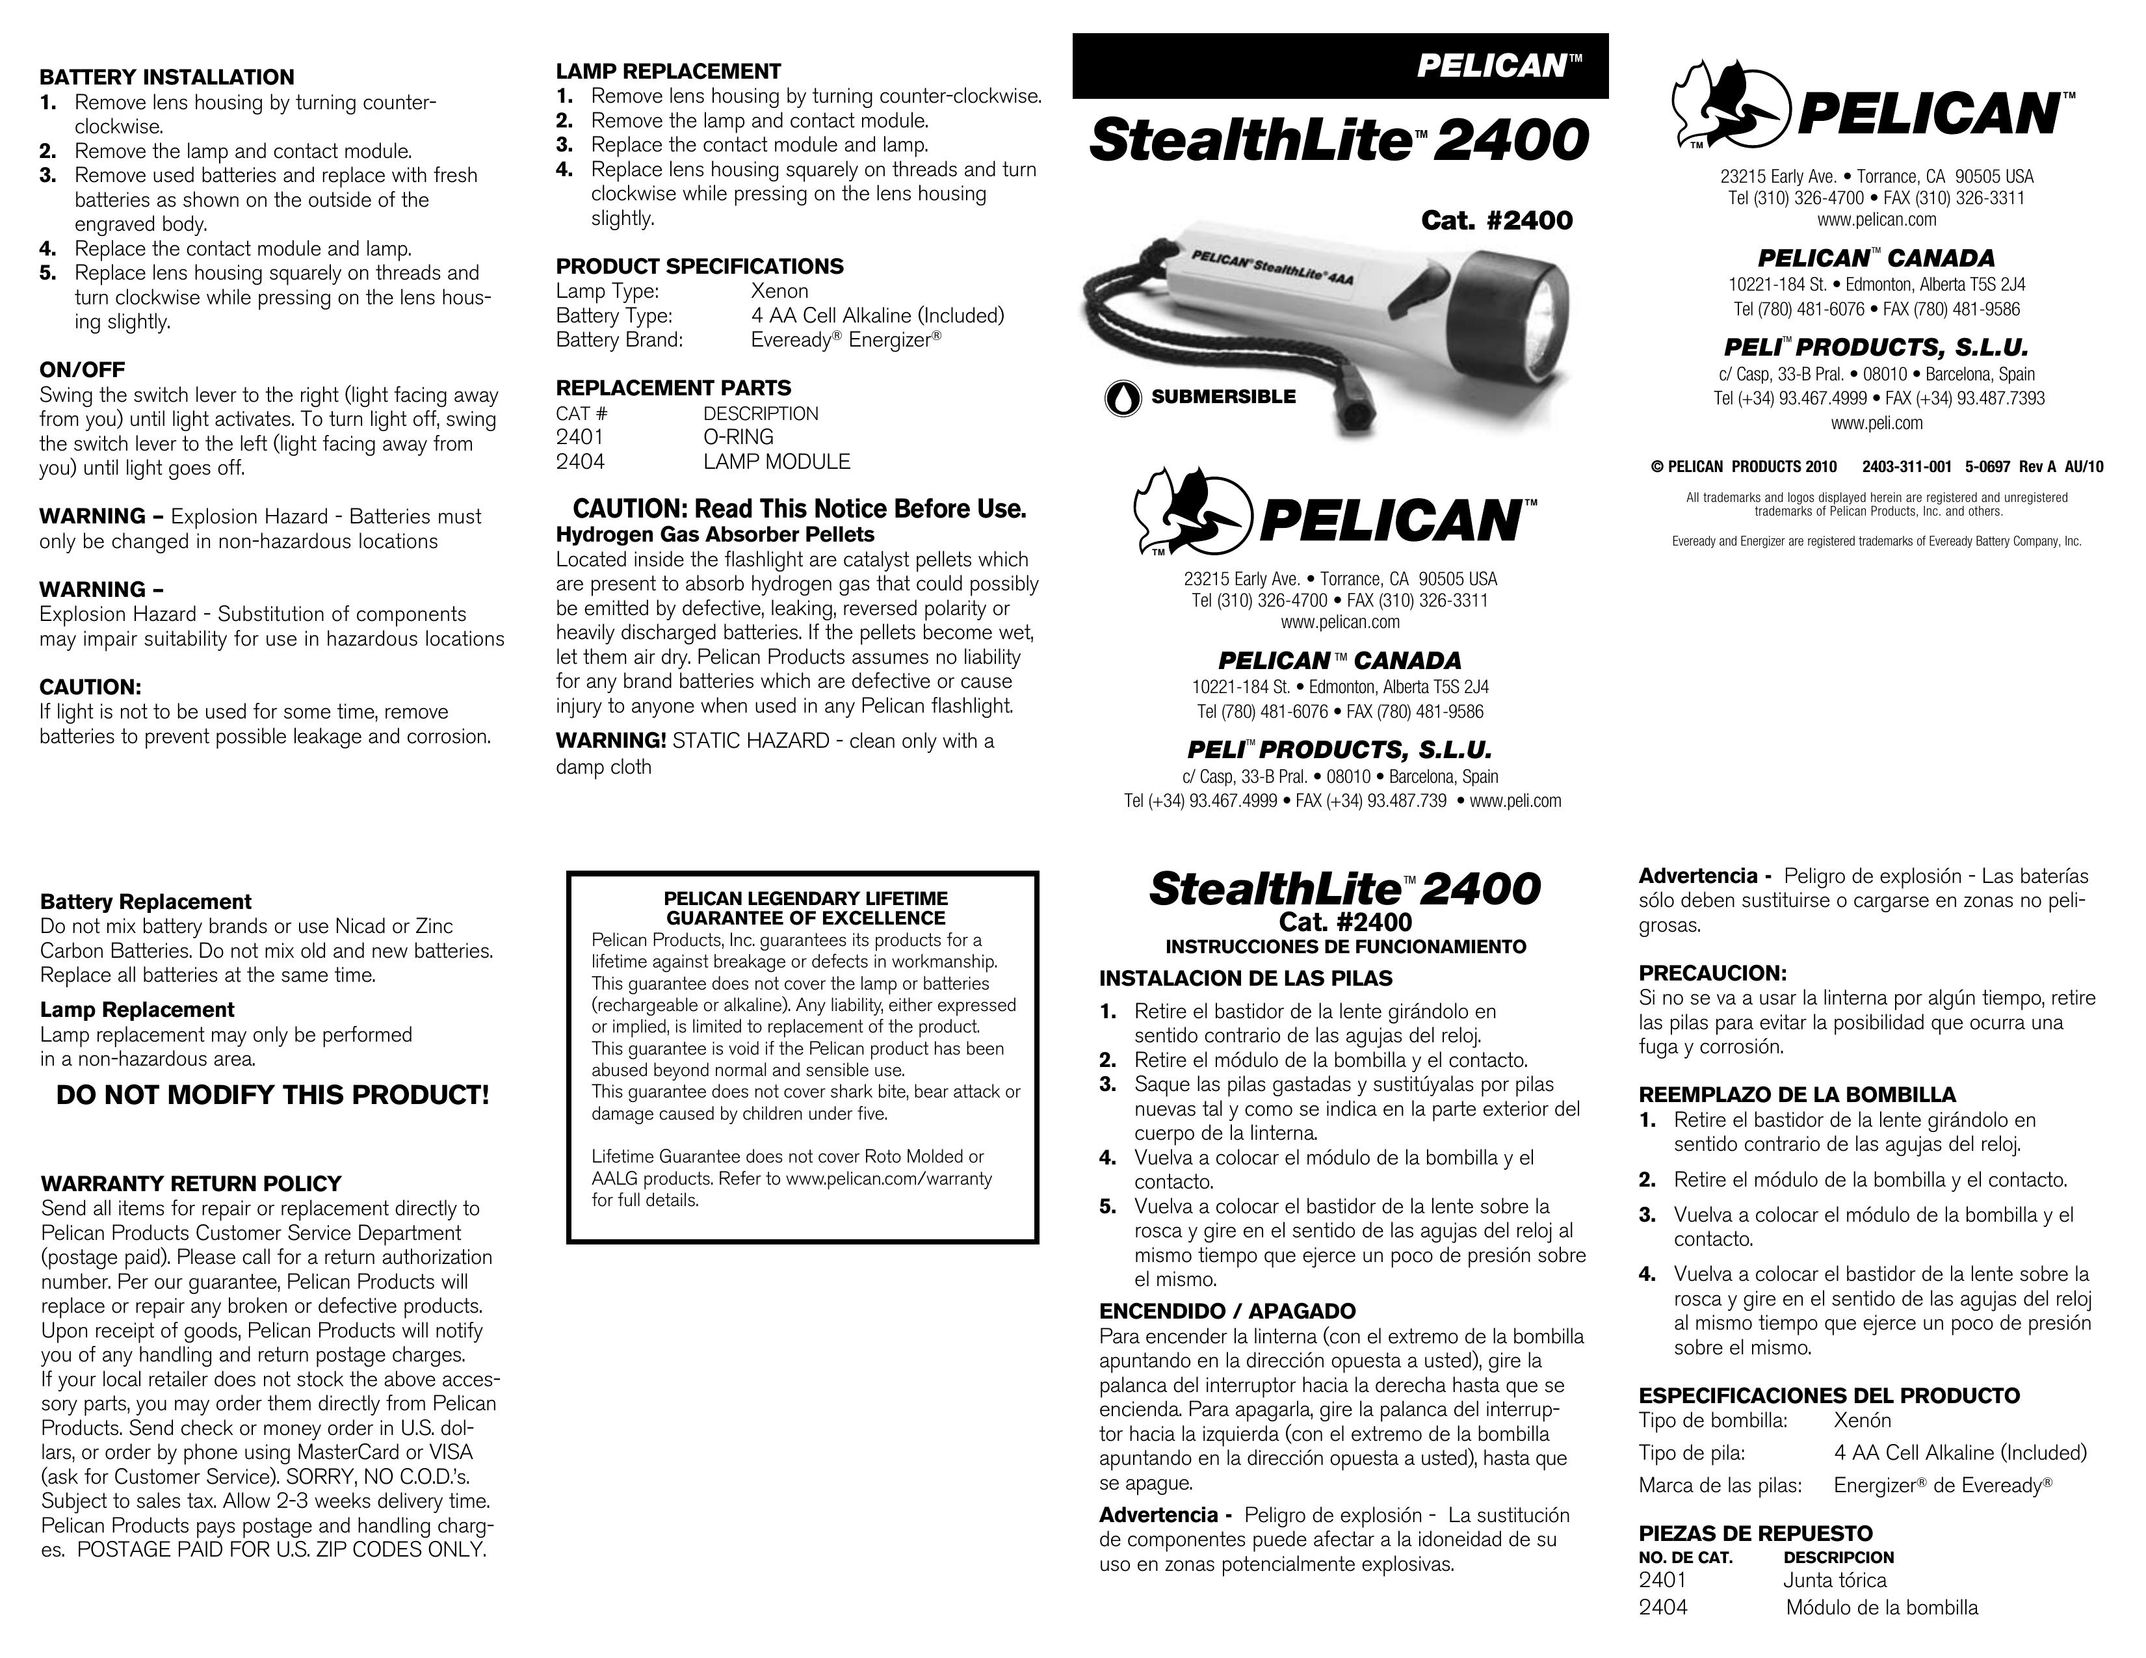 Pelican StealthLite2400 Home Safety Product User Manual